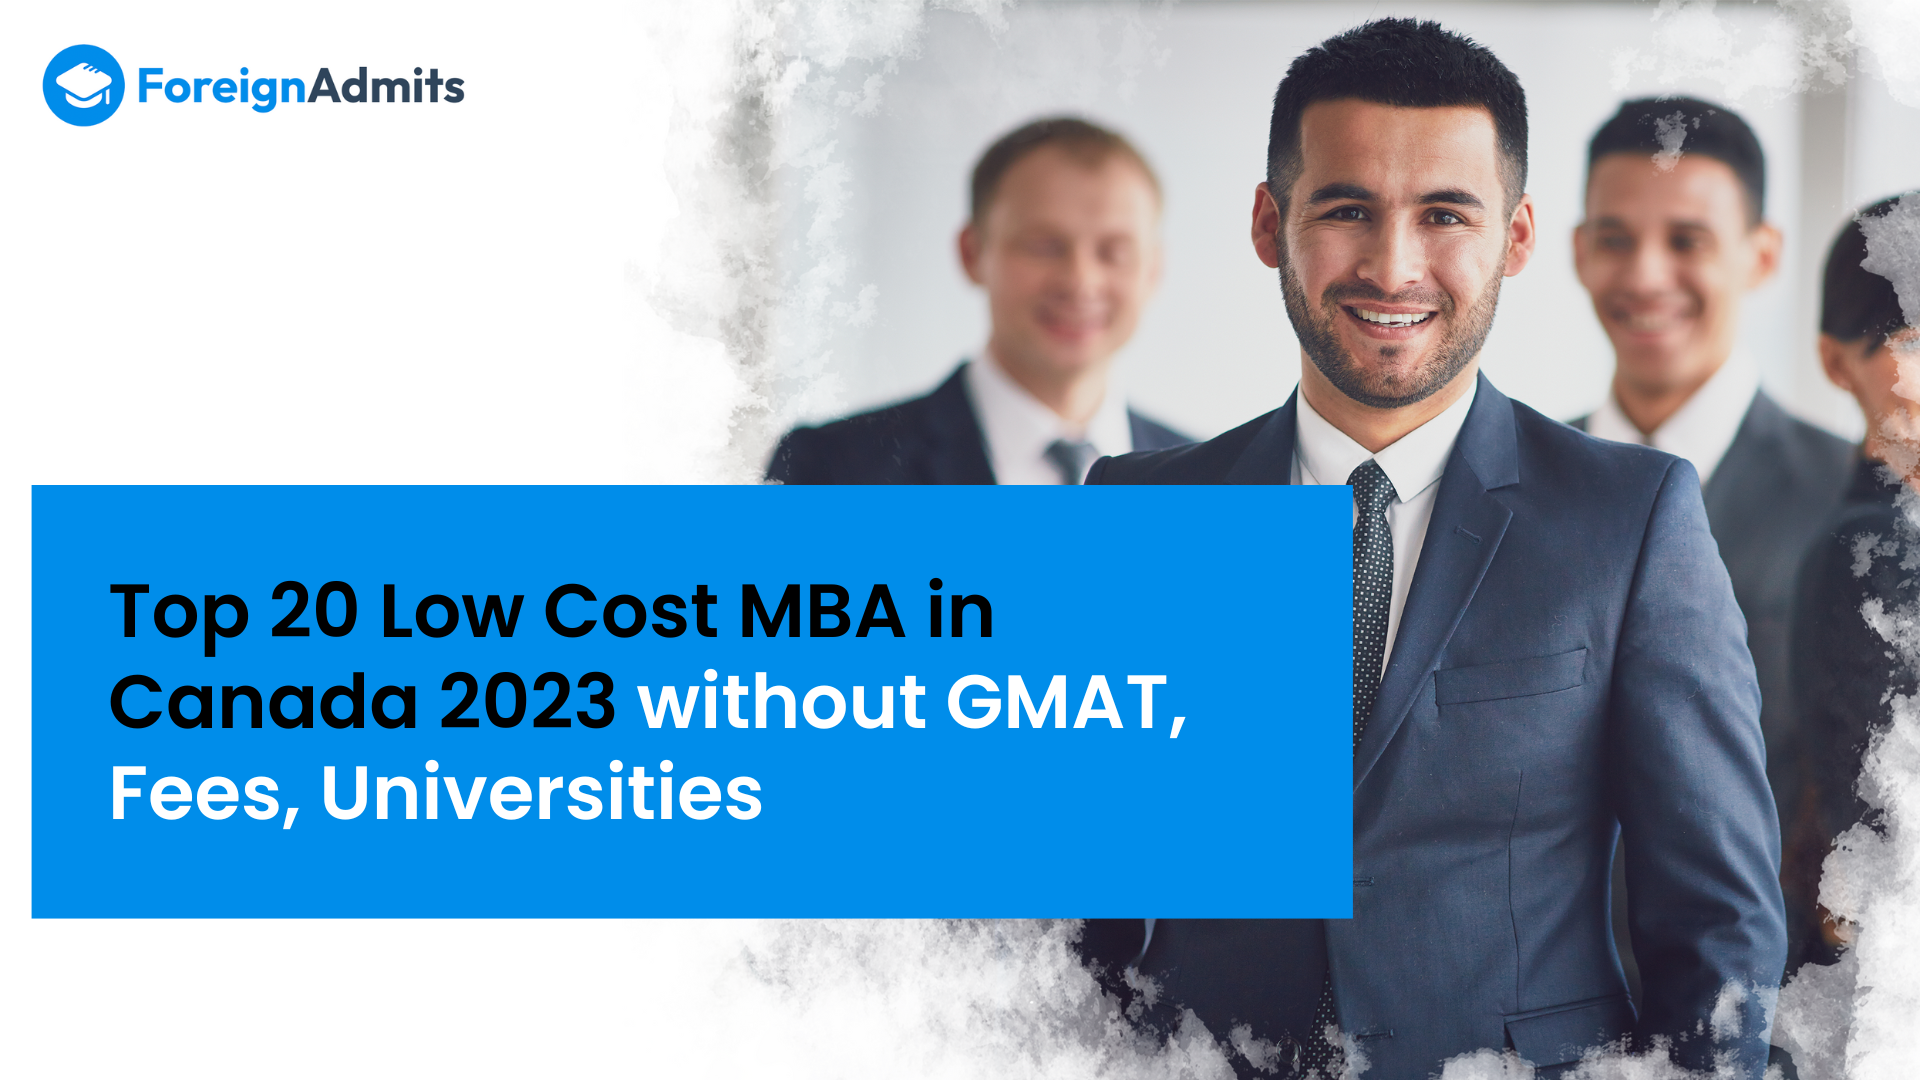 Top 20 Low-Cost MBA in Canada 2023 without GMAT, Fees, Universities